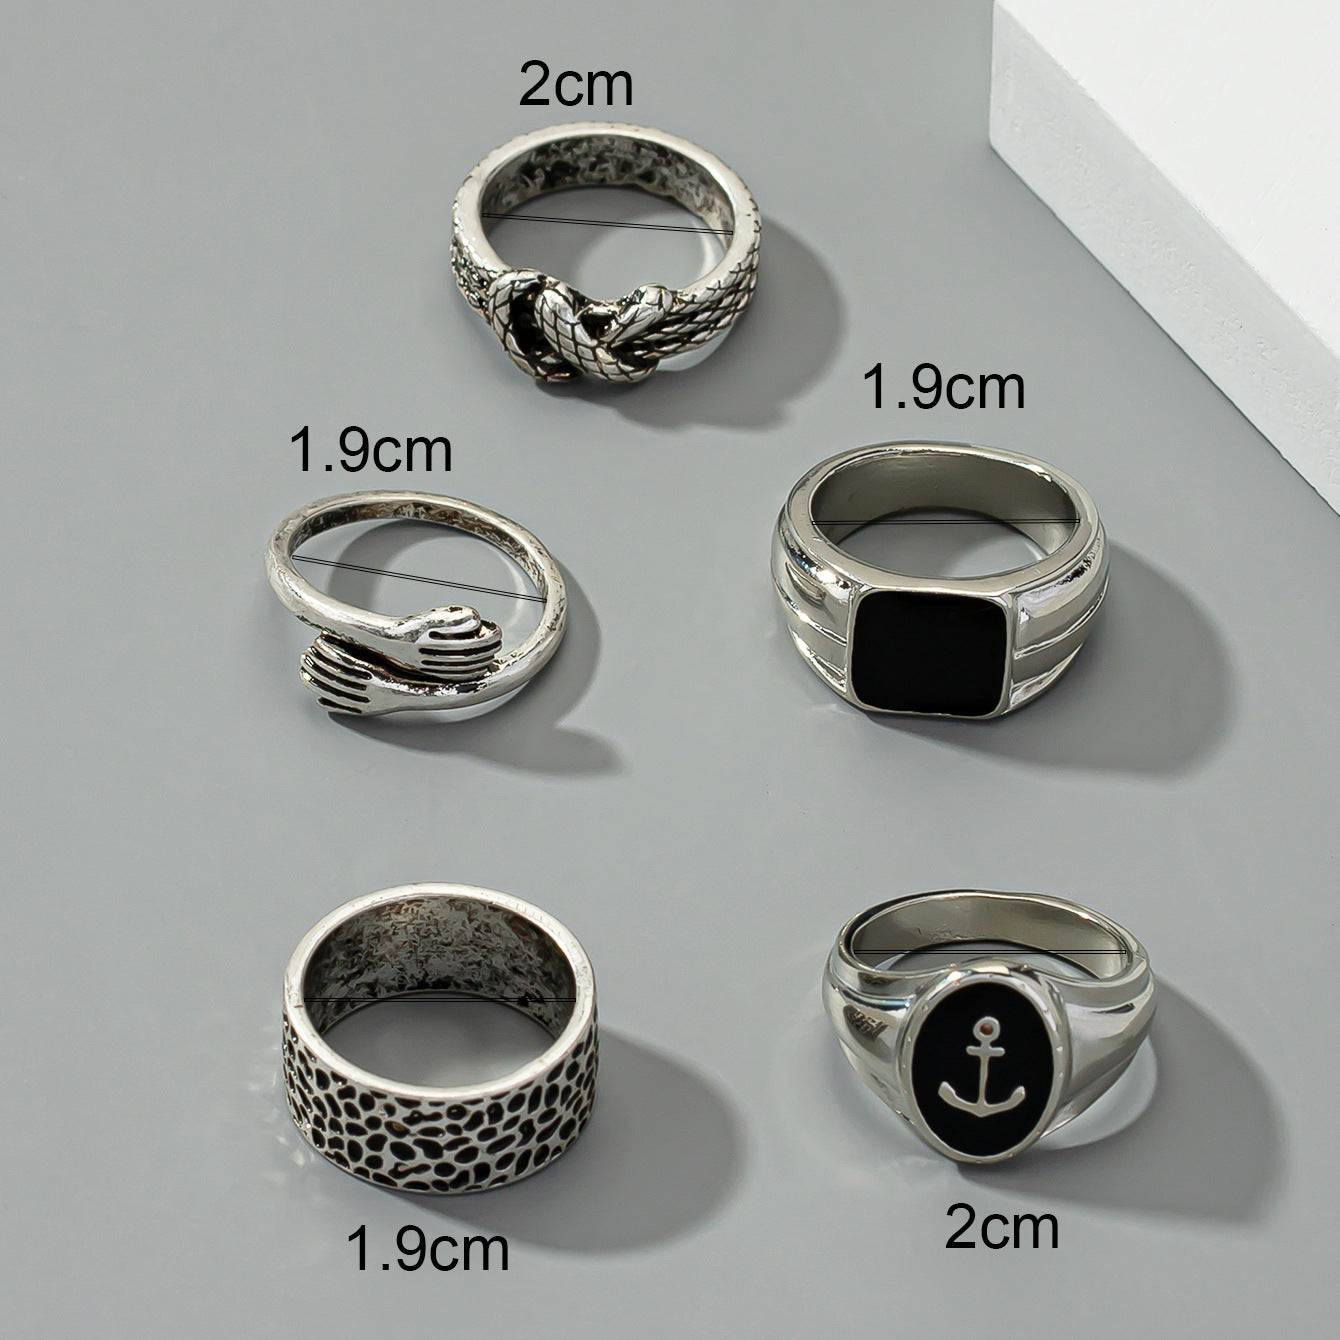 European and American Men's Ring Set with Instagram Bracelets - Planderful Vienna Verve Collection